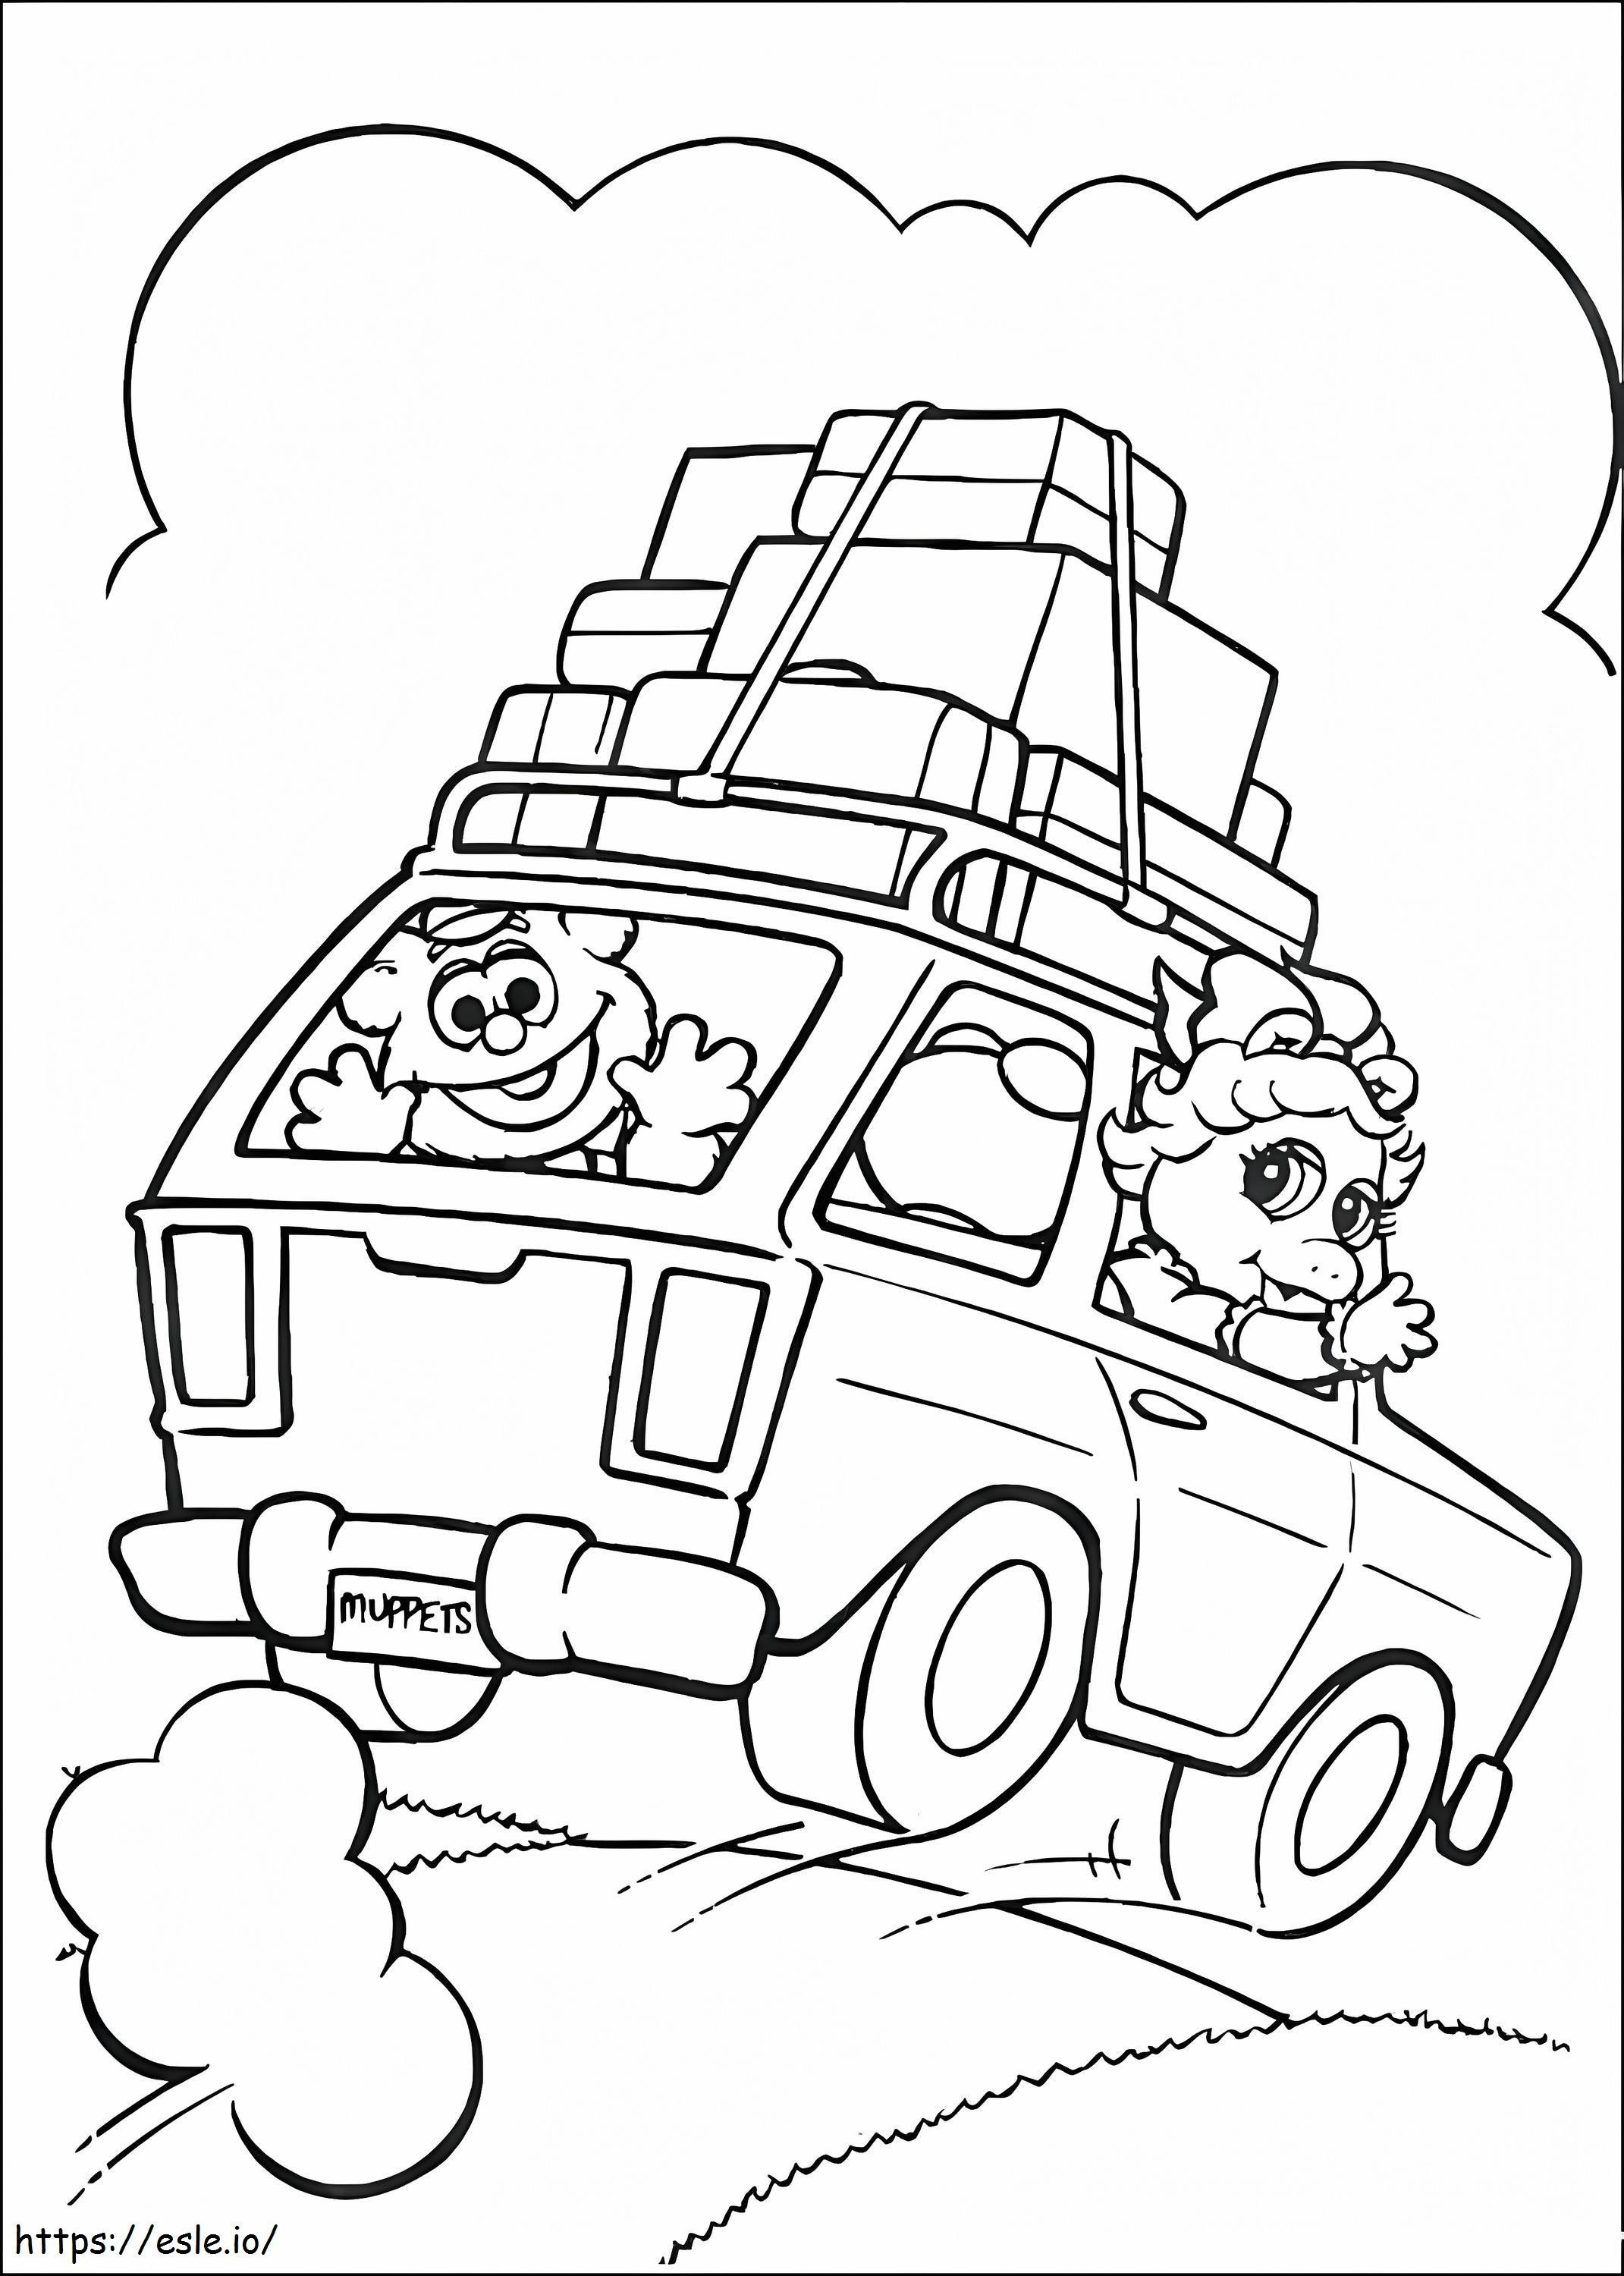 Baby Kermit Miss Piggy And Baby Fozzie From Muppet Babies coloring page